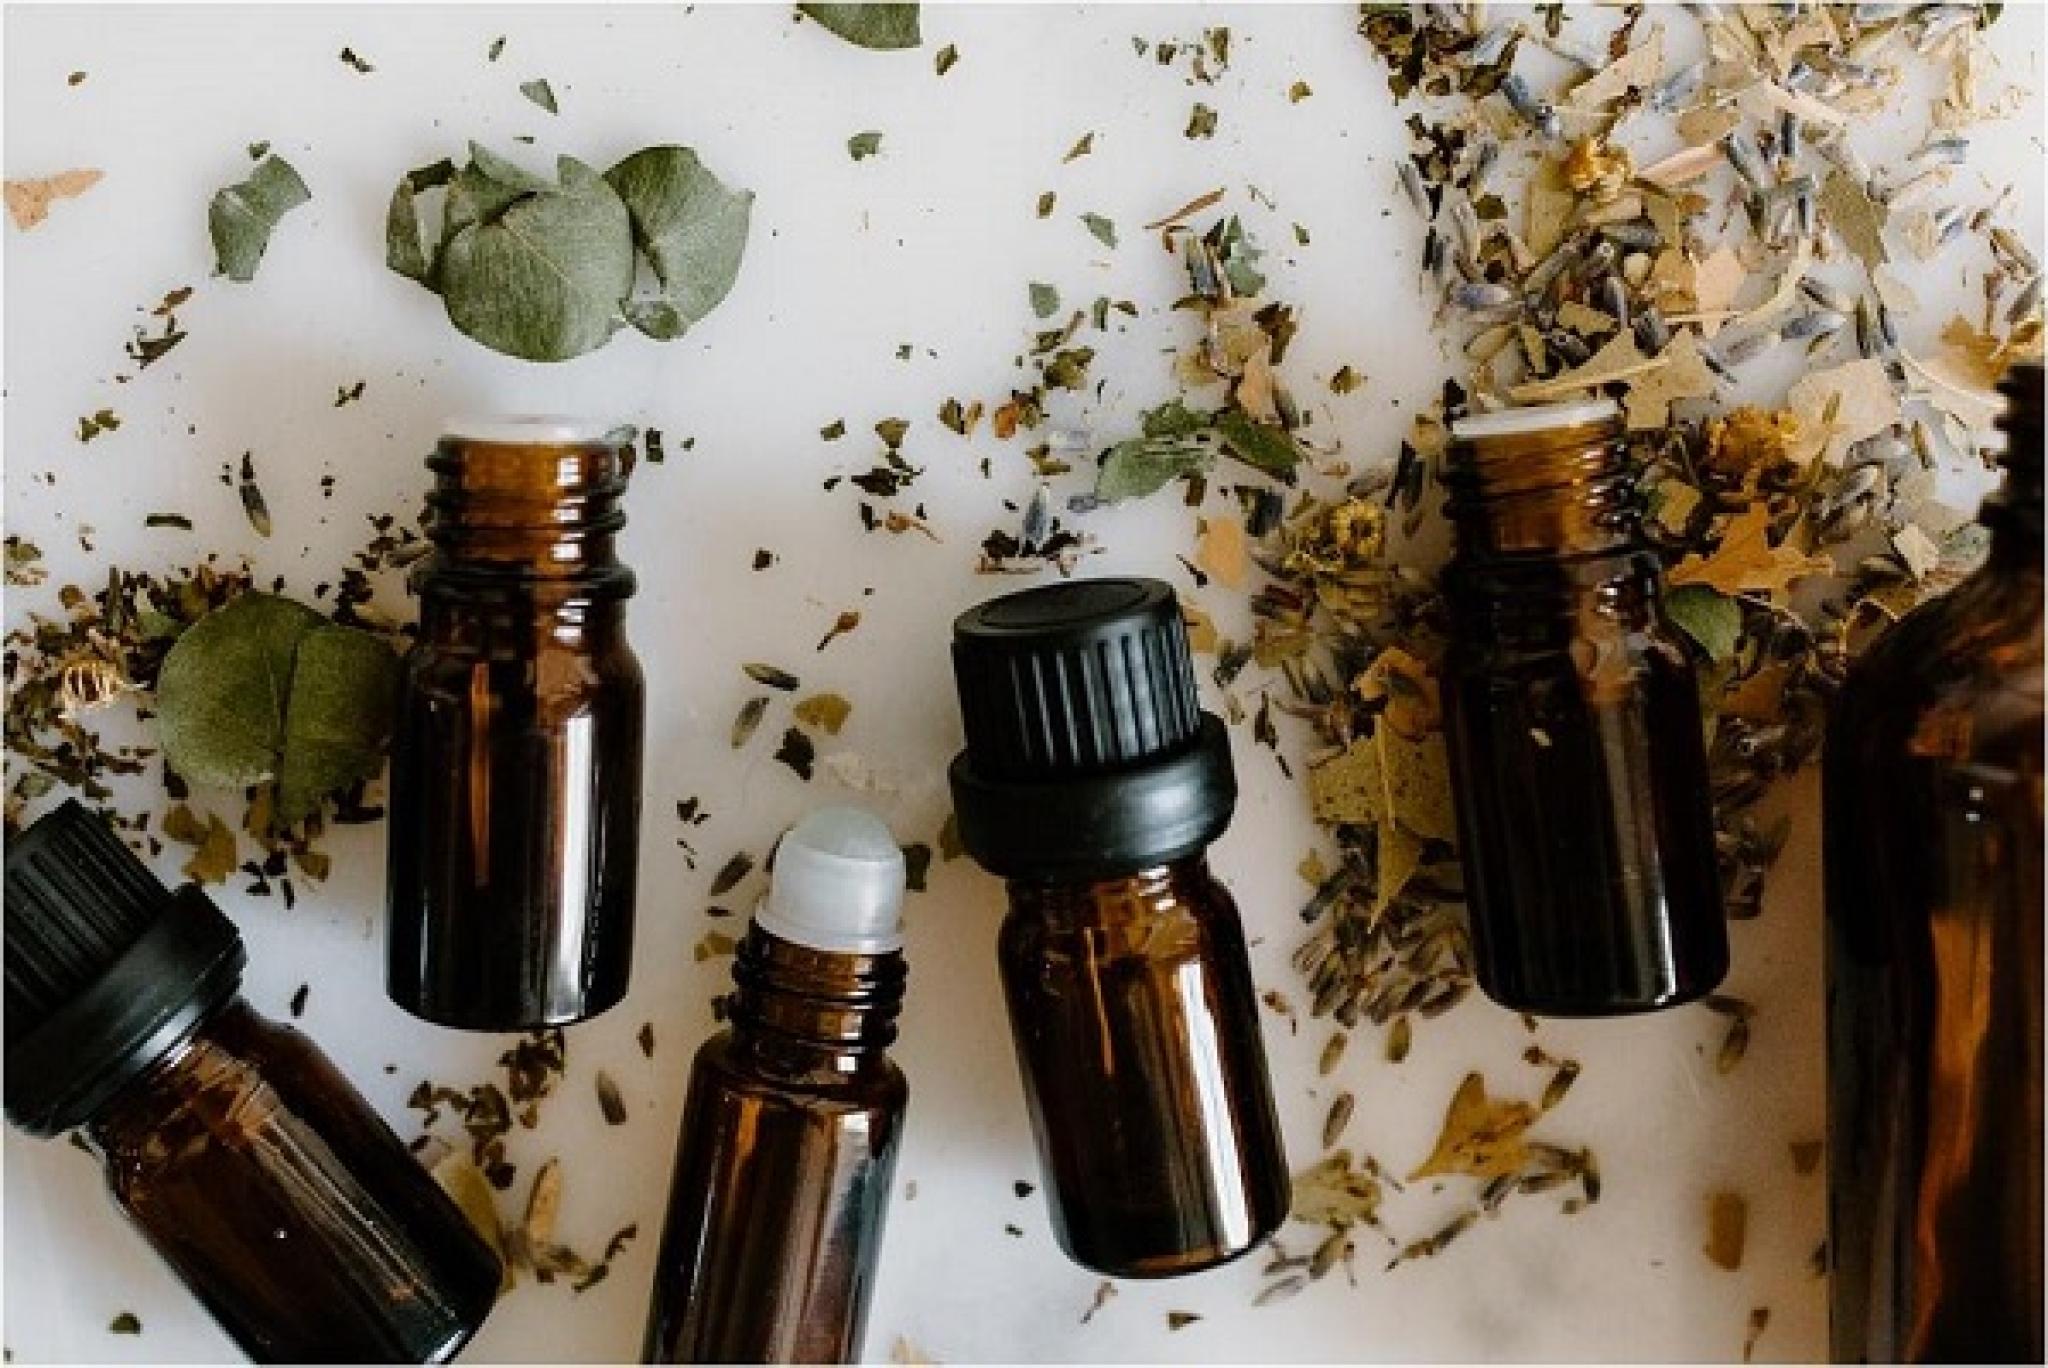 Image of eucalyptus leaves and other botanicals with medicinal dropper bottles by Tara Winstead from https://www.pexels.com/photo/essential-oil-bottles-and-herbal-medicine-on-white-surface-6694188/